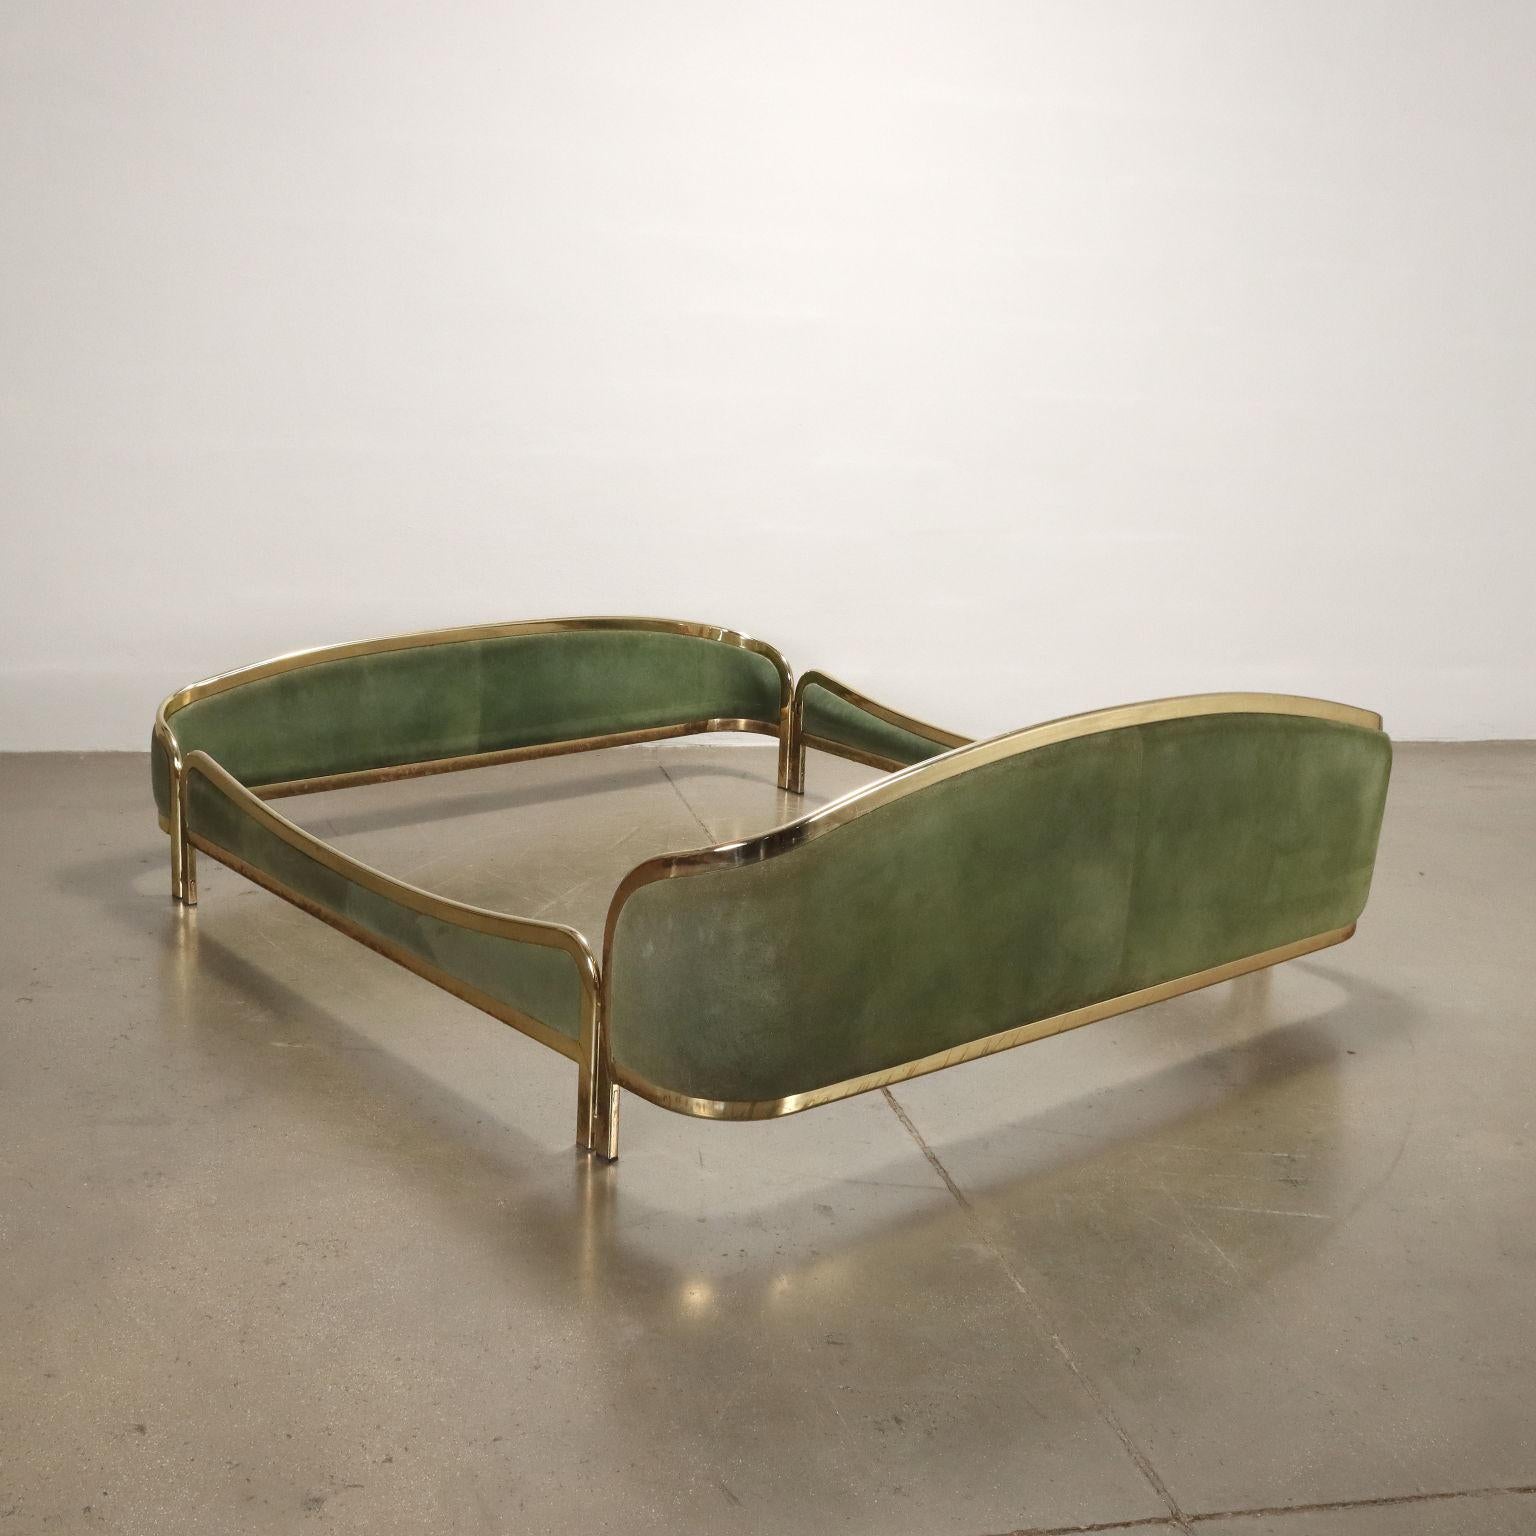 Late 20th Century Bed 70s-80s Brass Suede Leather